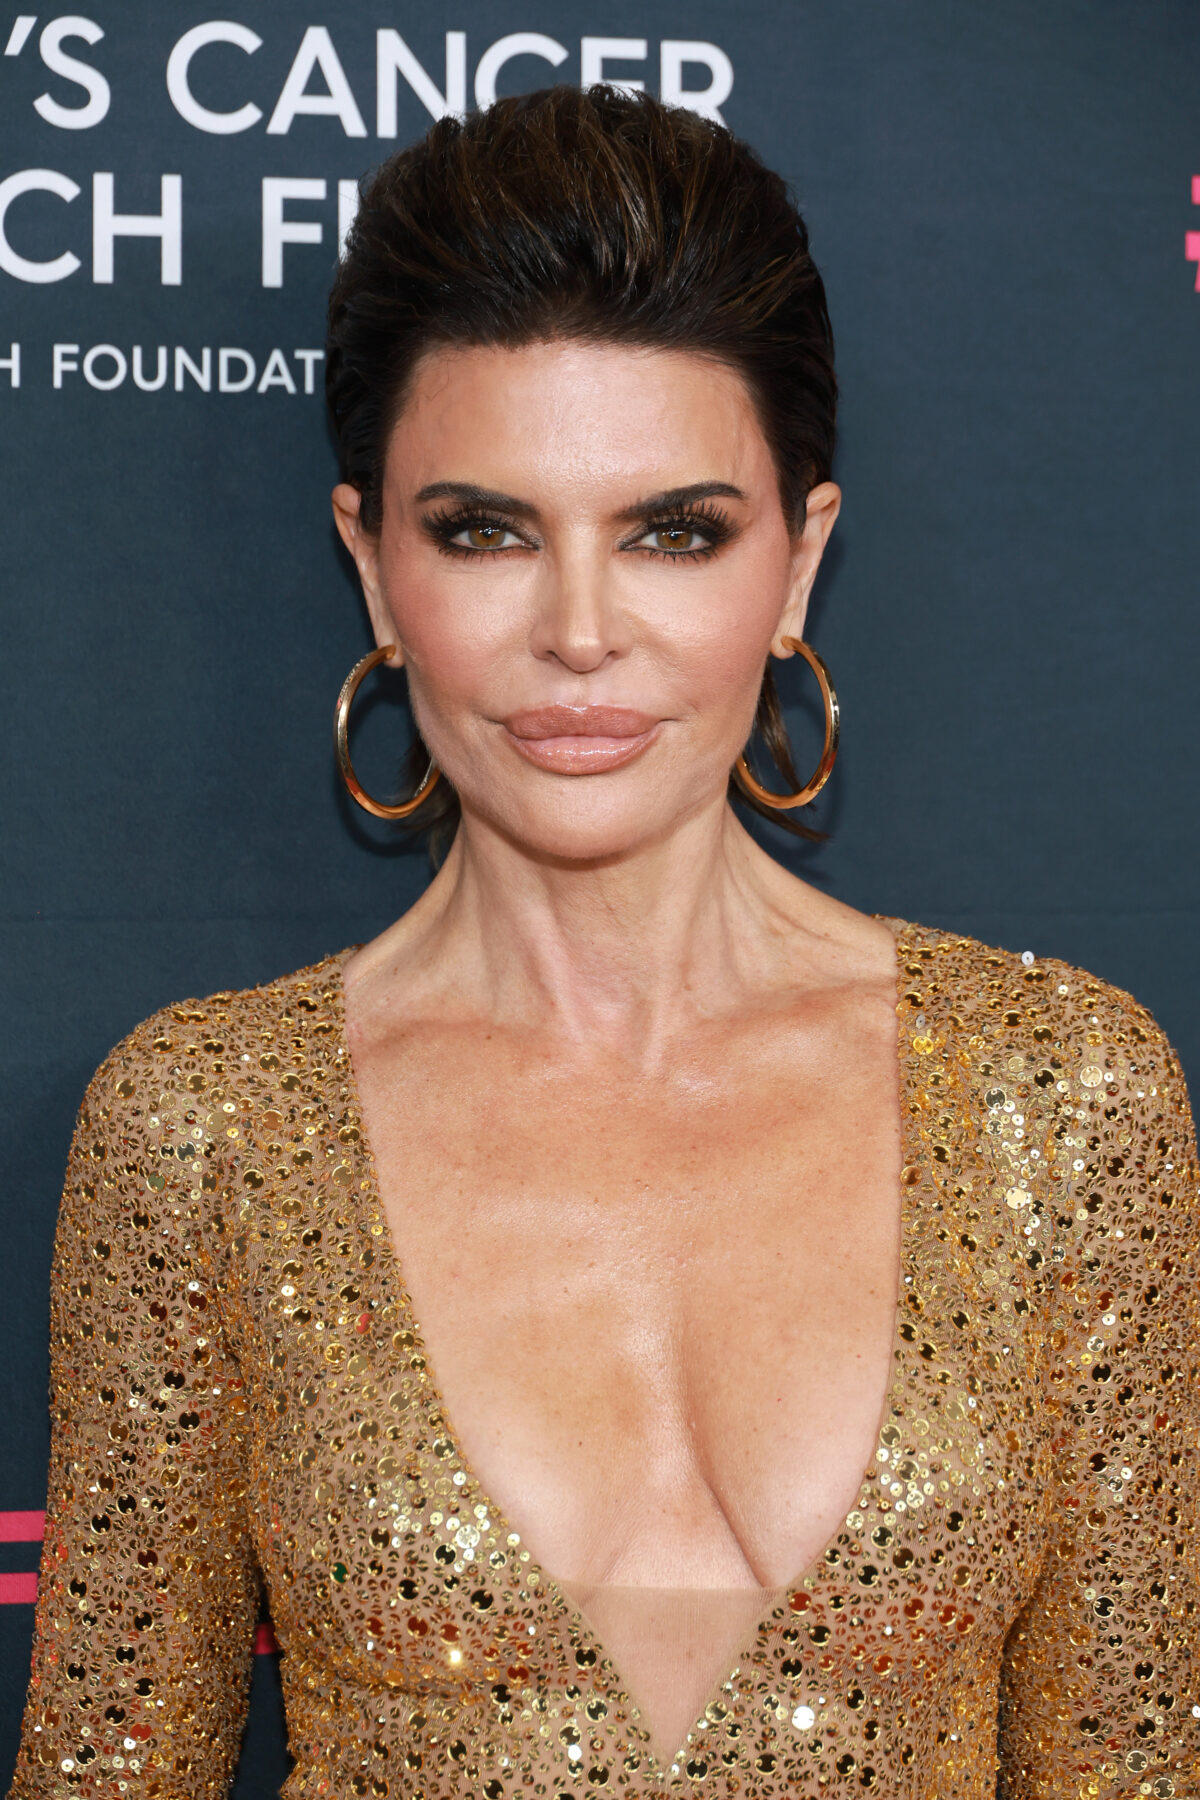 Lisa Rinna, actress and star on ‘Real Housewives of Beverly Hills’